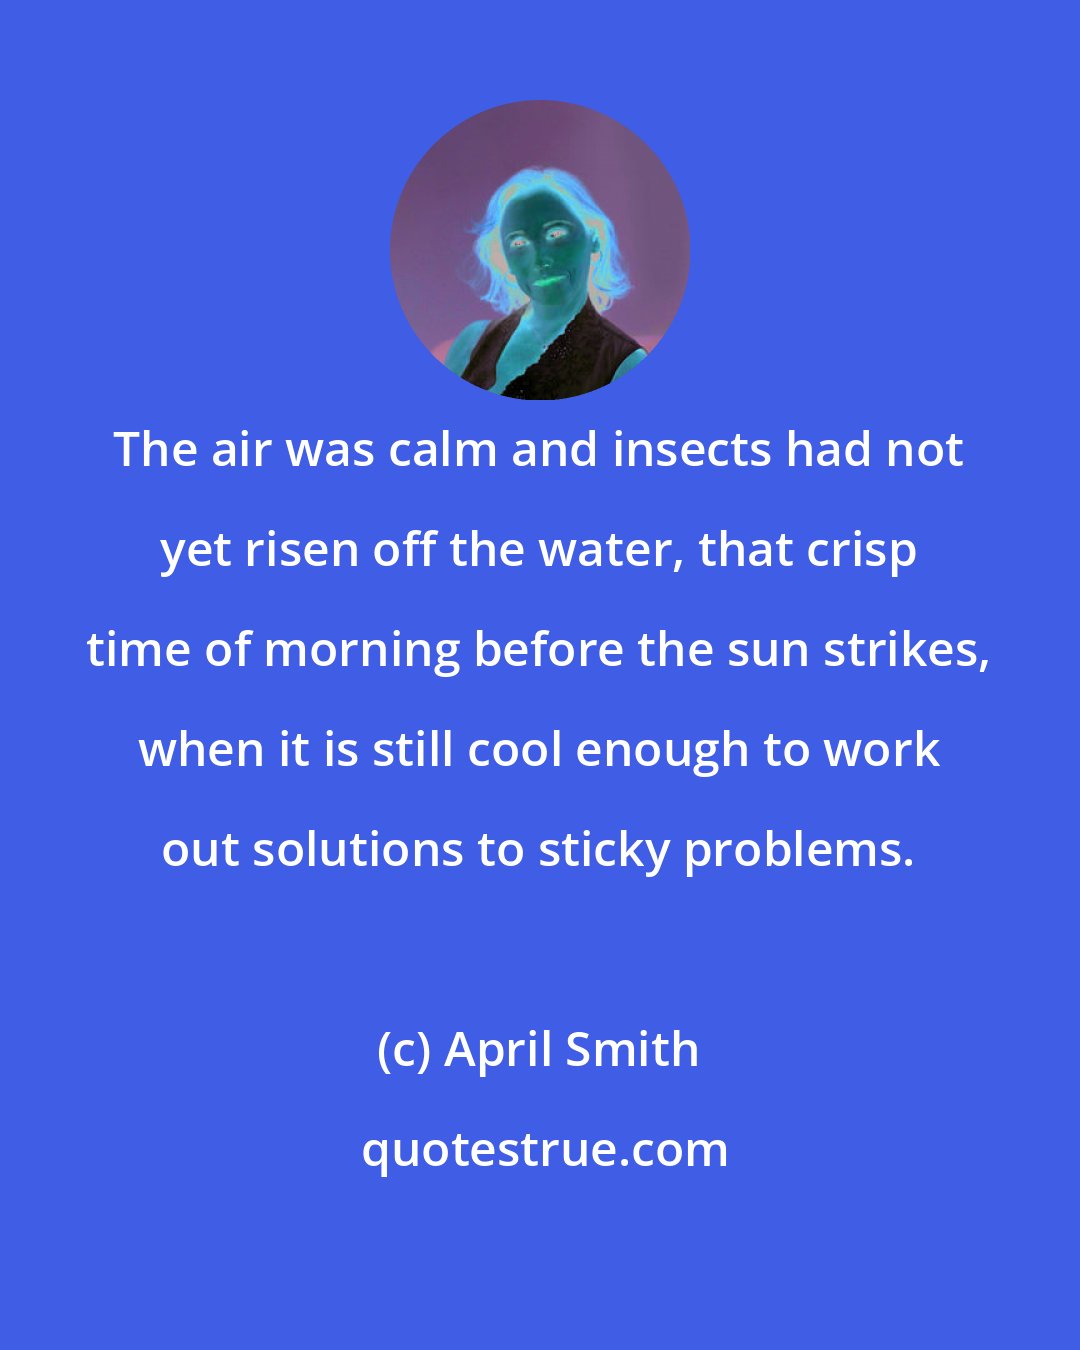 April Smith: The air was calm and insects had not yet risen off the water, that crisp time of morning before the sun strikes, when it is still cool enough to work out solutions to sticky problems.